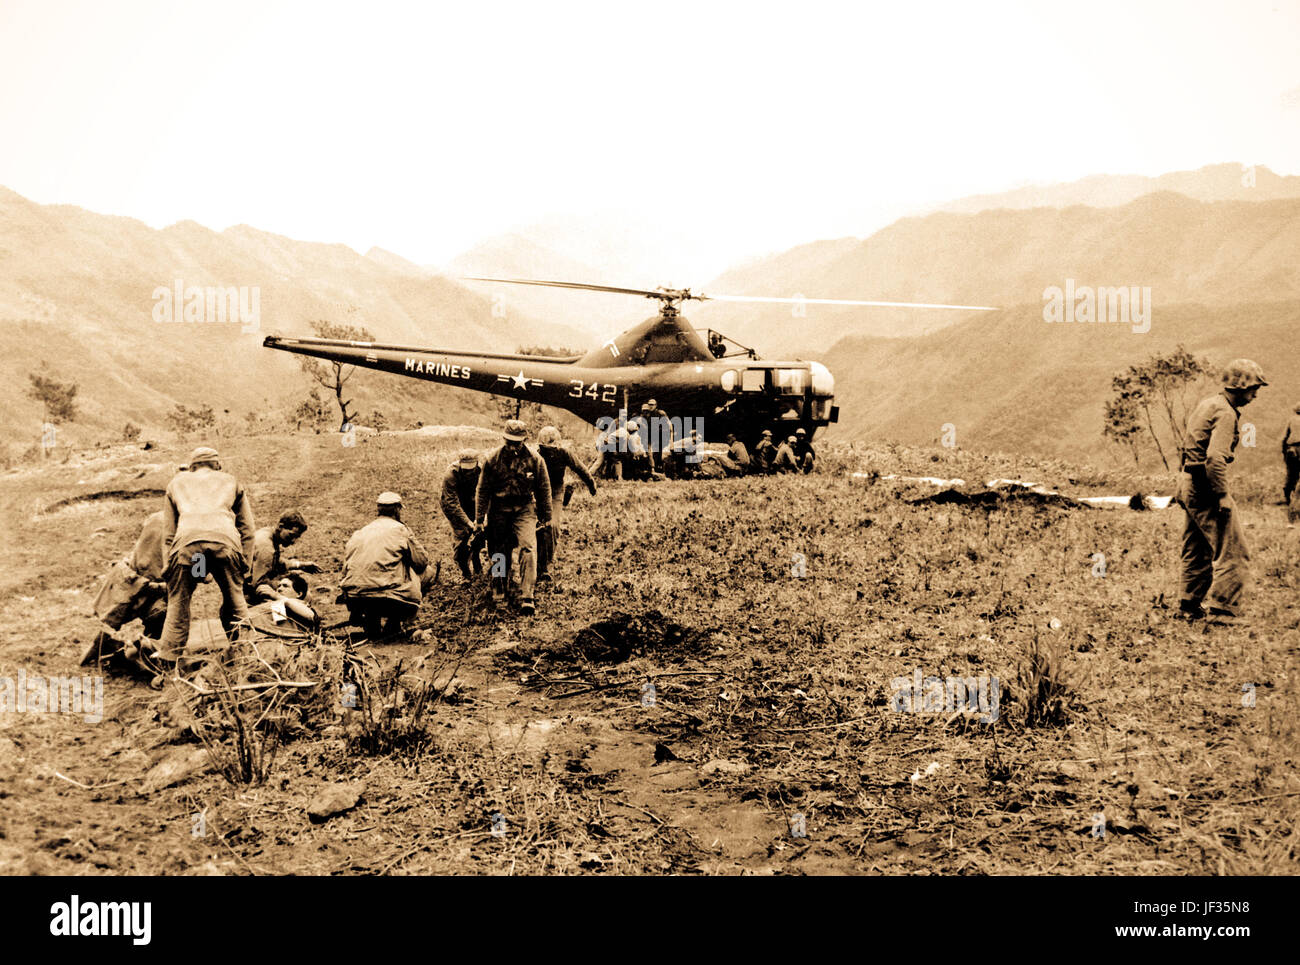 U.S. Marines wounded at Kari San Mountain are evacuated via helicopter and flown to hospital in near areas for treatment.  Navy Corpsmen prepare three wounded Marines for evacuation.  May 23, 1951.  Photo by N.H. McMasters.  (Navy) Stock Photo